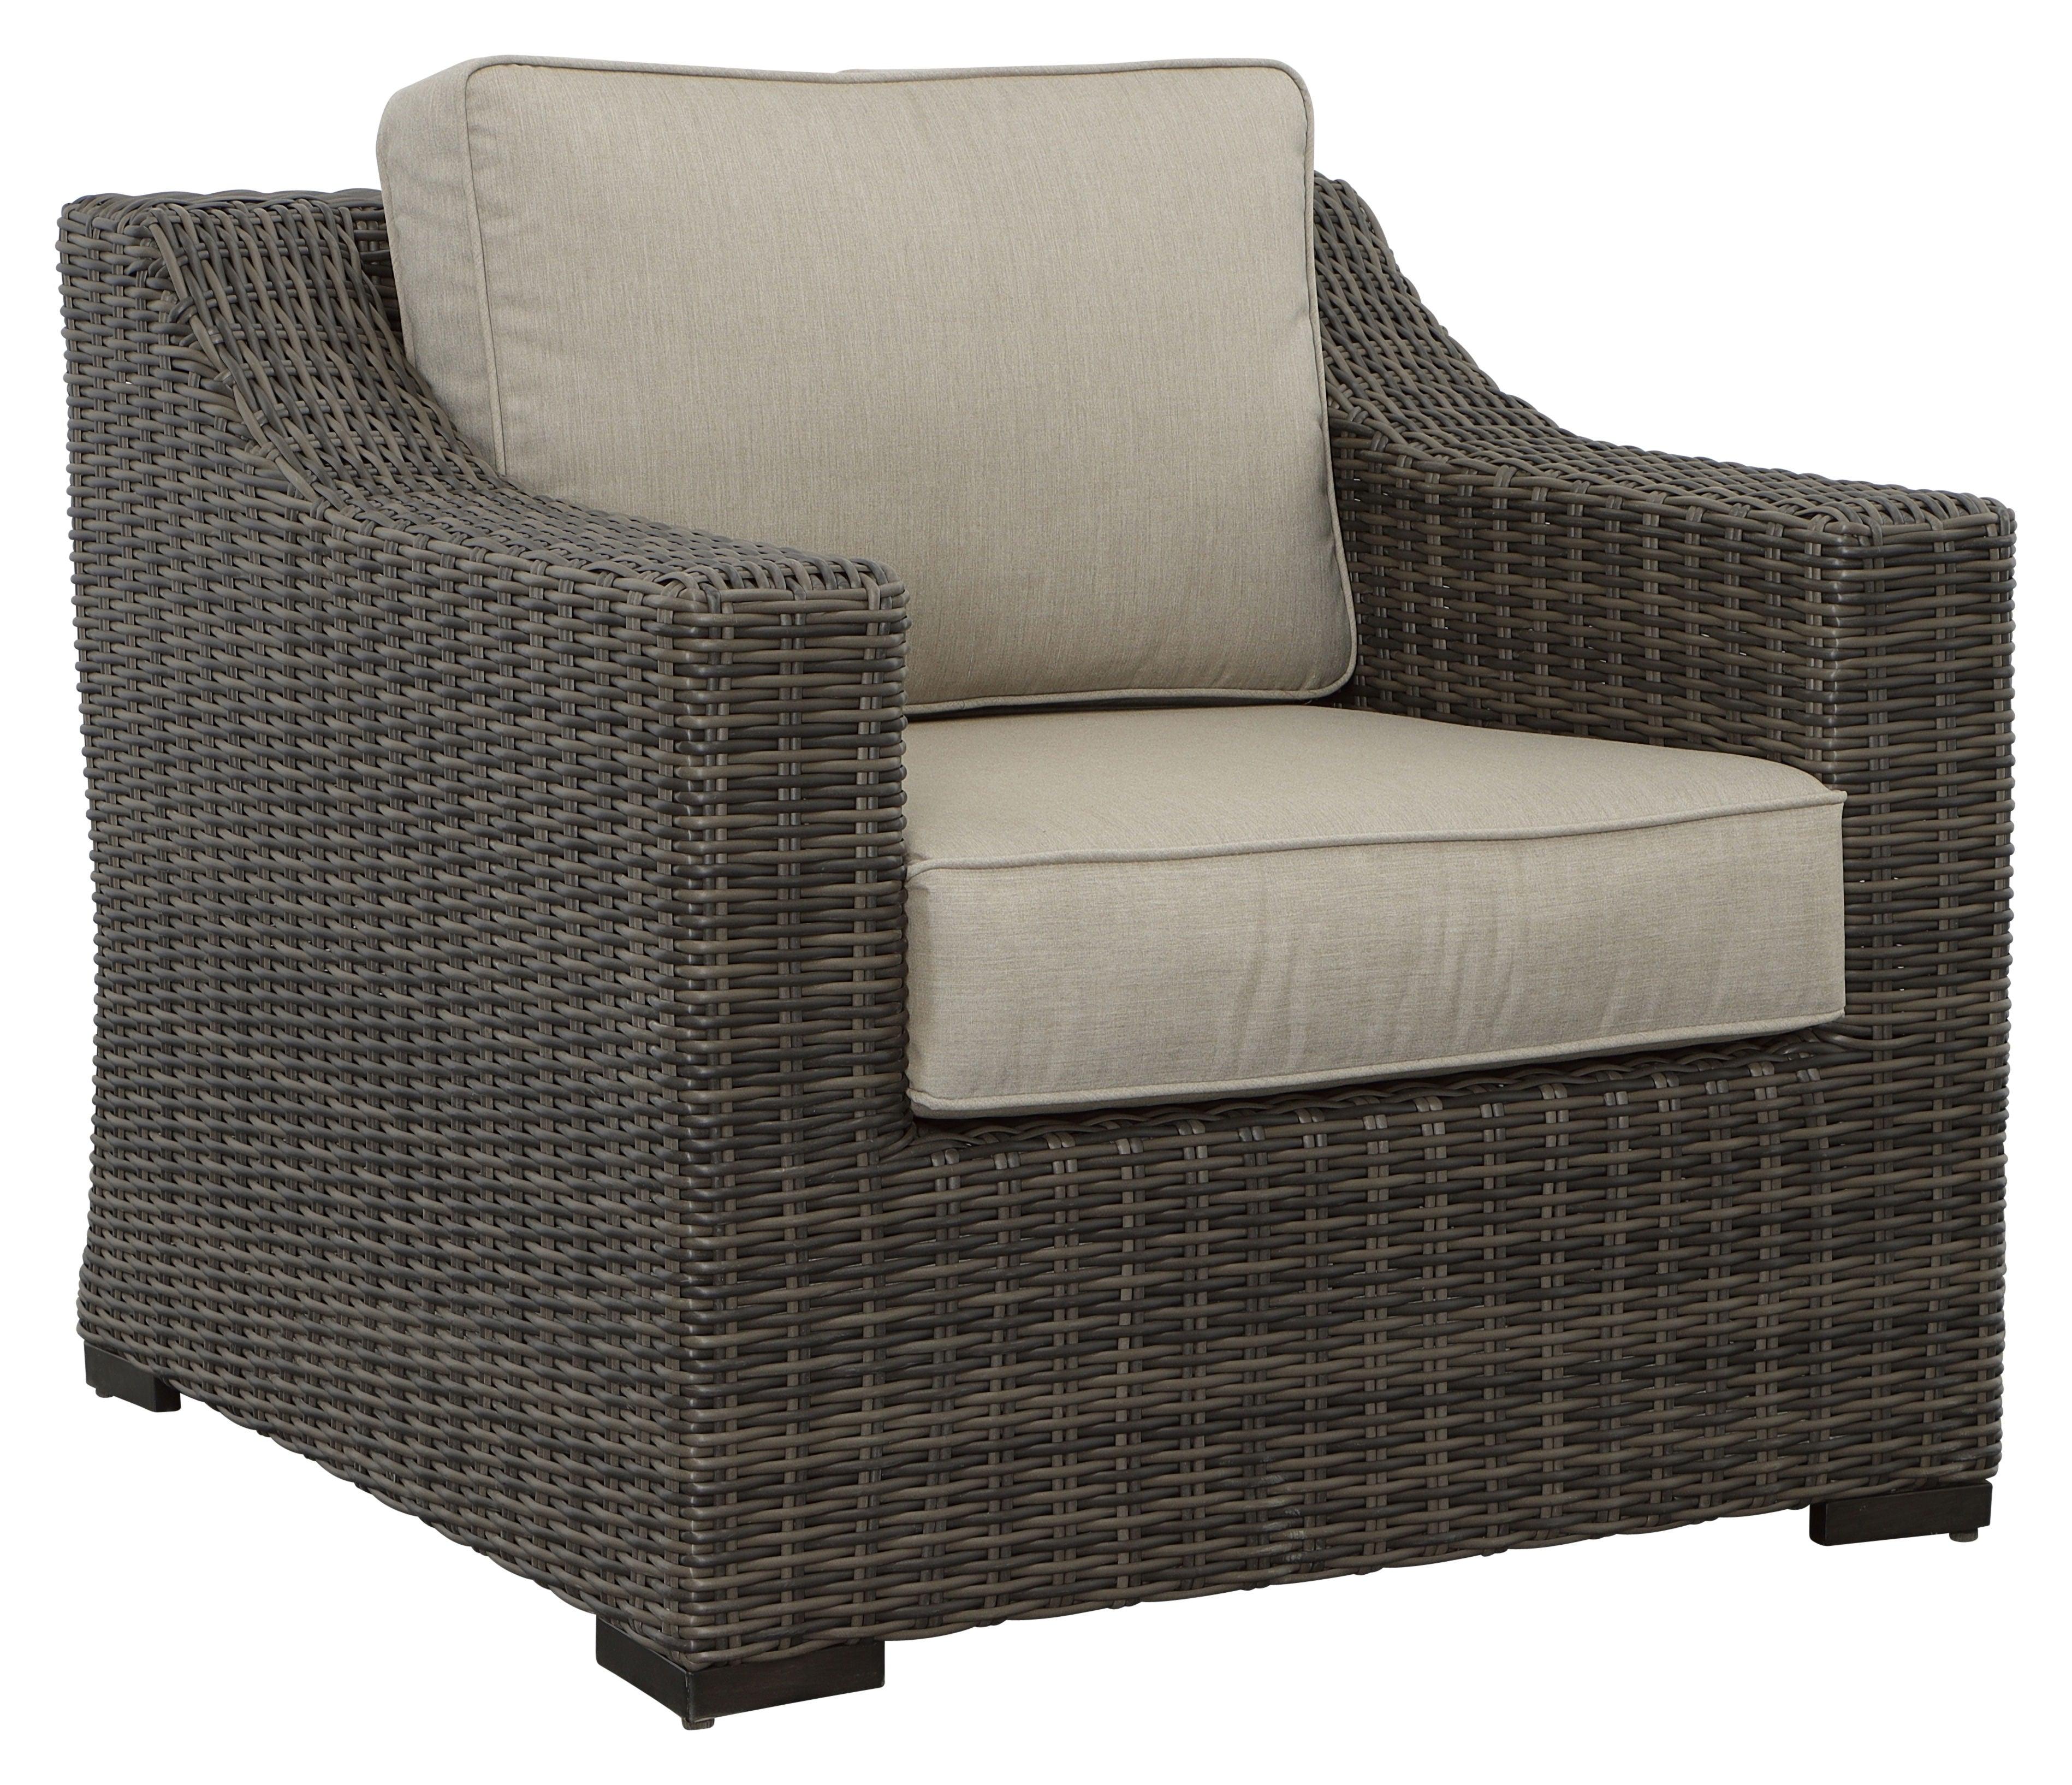 Steve Silver Furniture - Jones - Outdoor Lounge Chair (Set of 2) - Brown - 5th Avenue Furniture